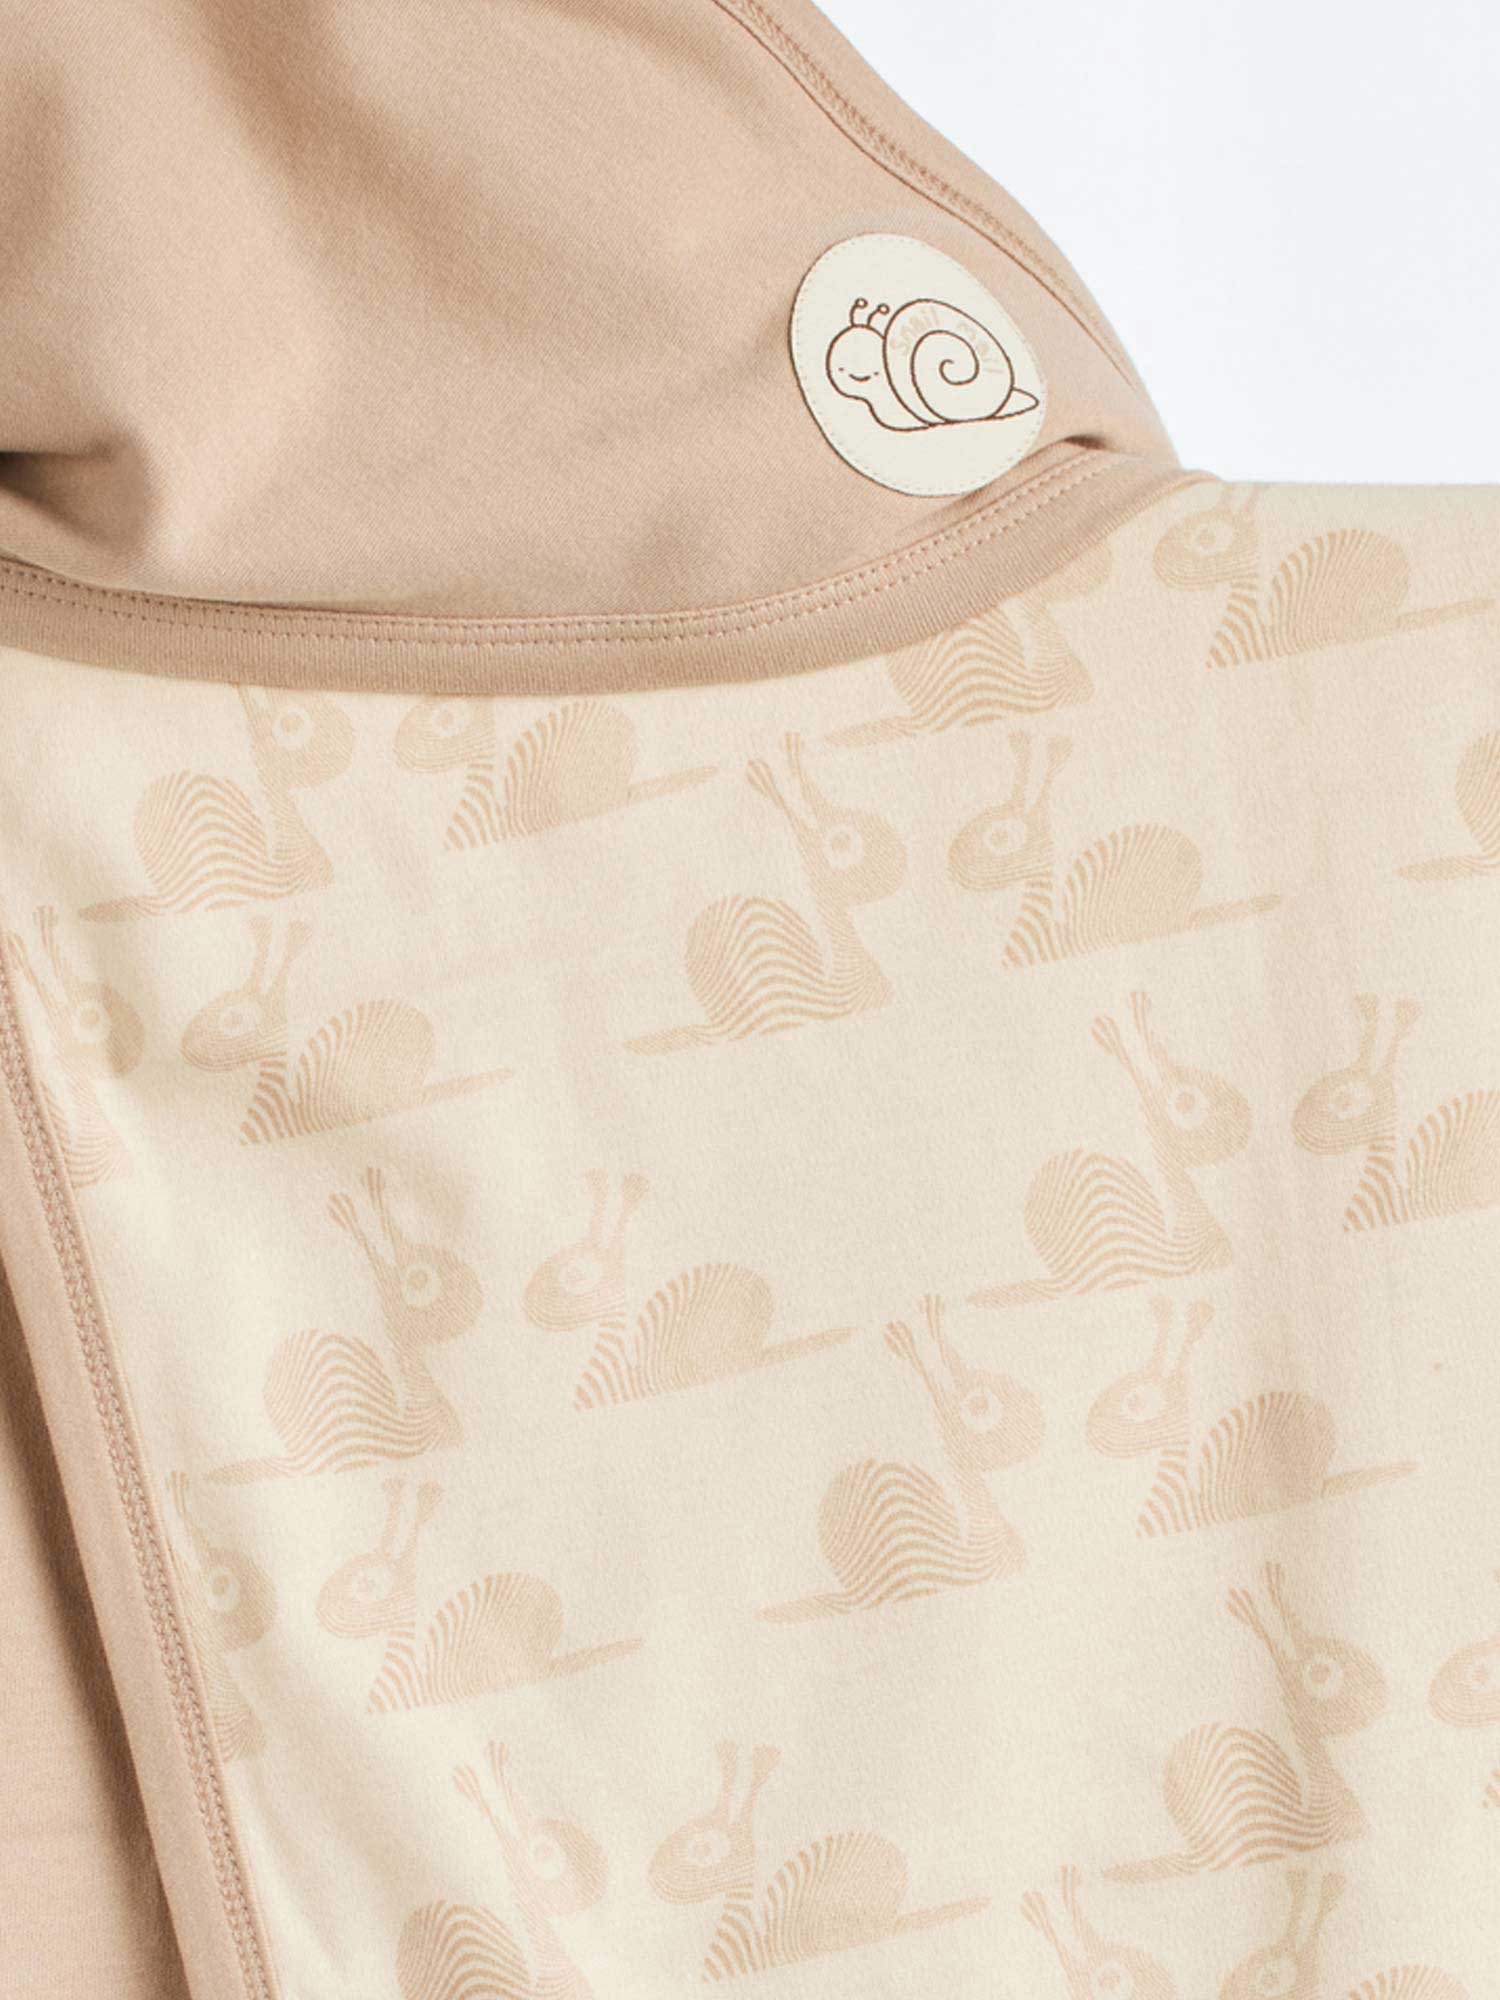 The patterned print gives it a unique and modern look, while the light and breathable material keeps your baby snug as a bug.